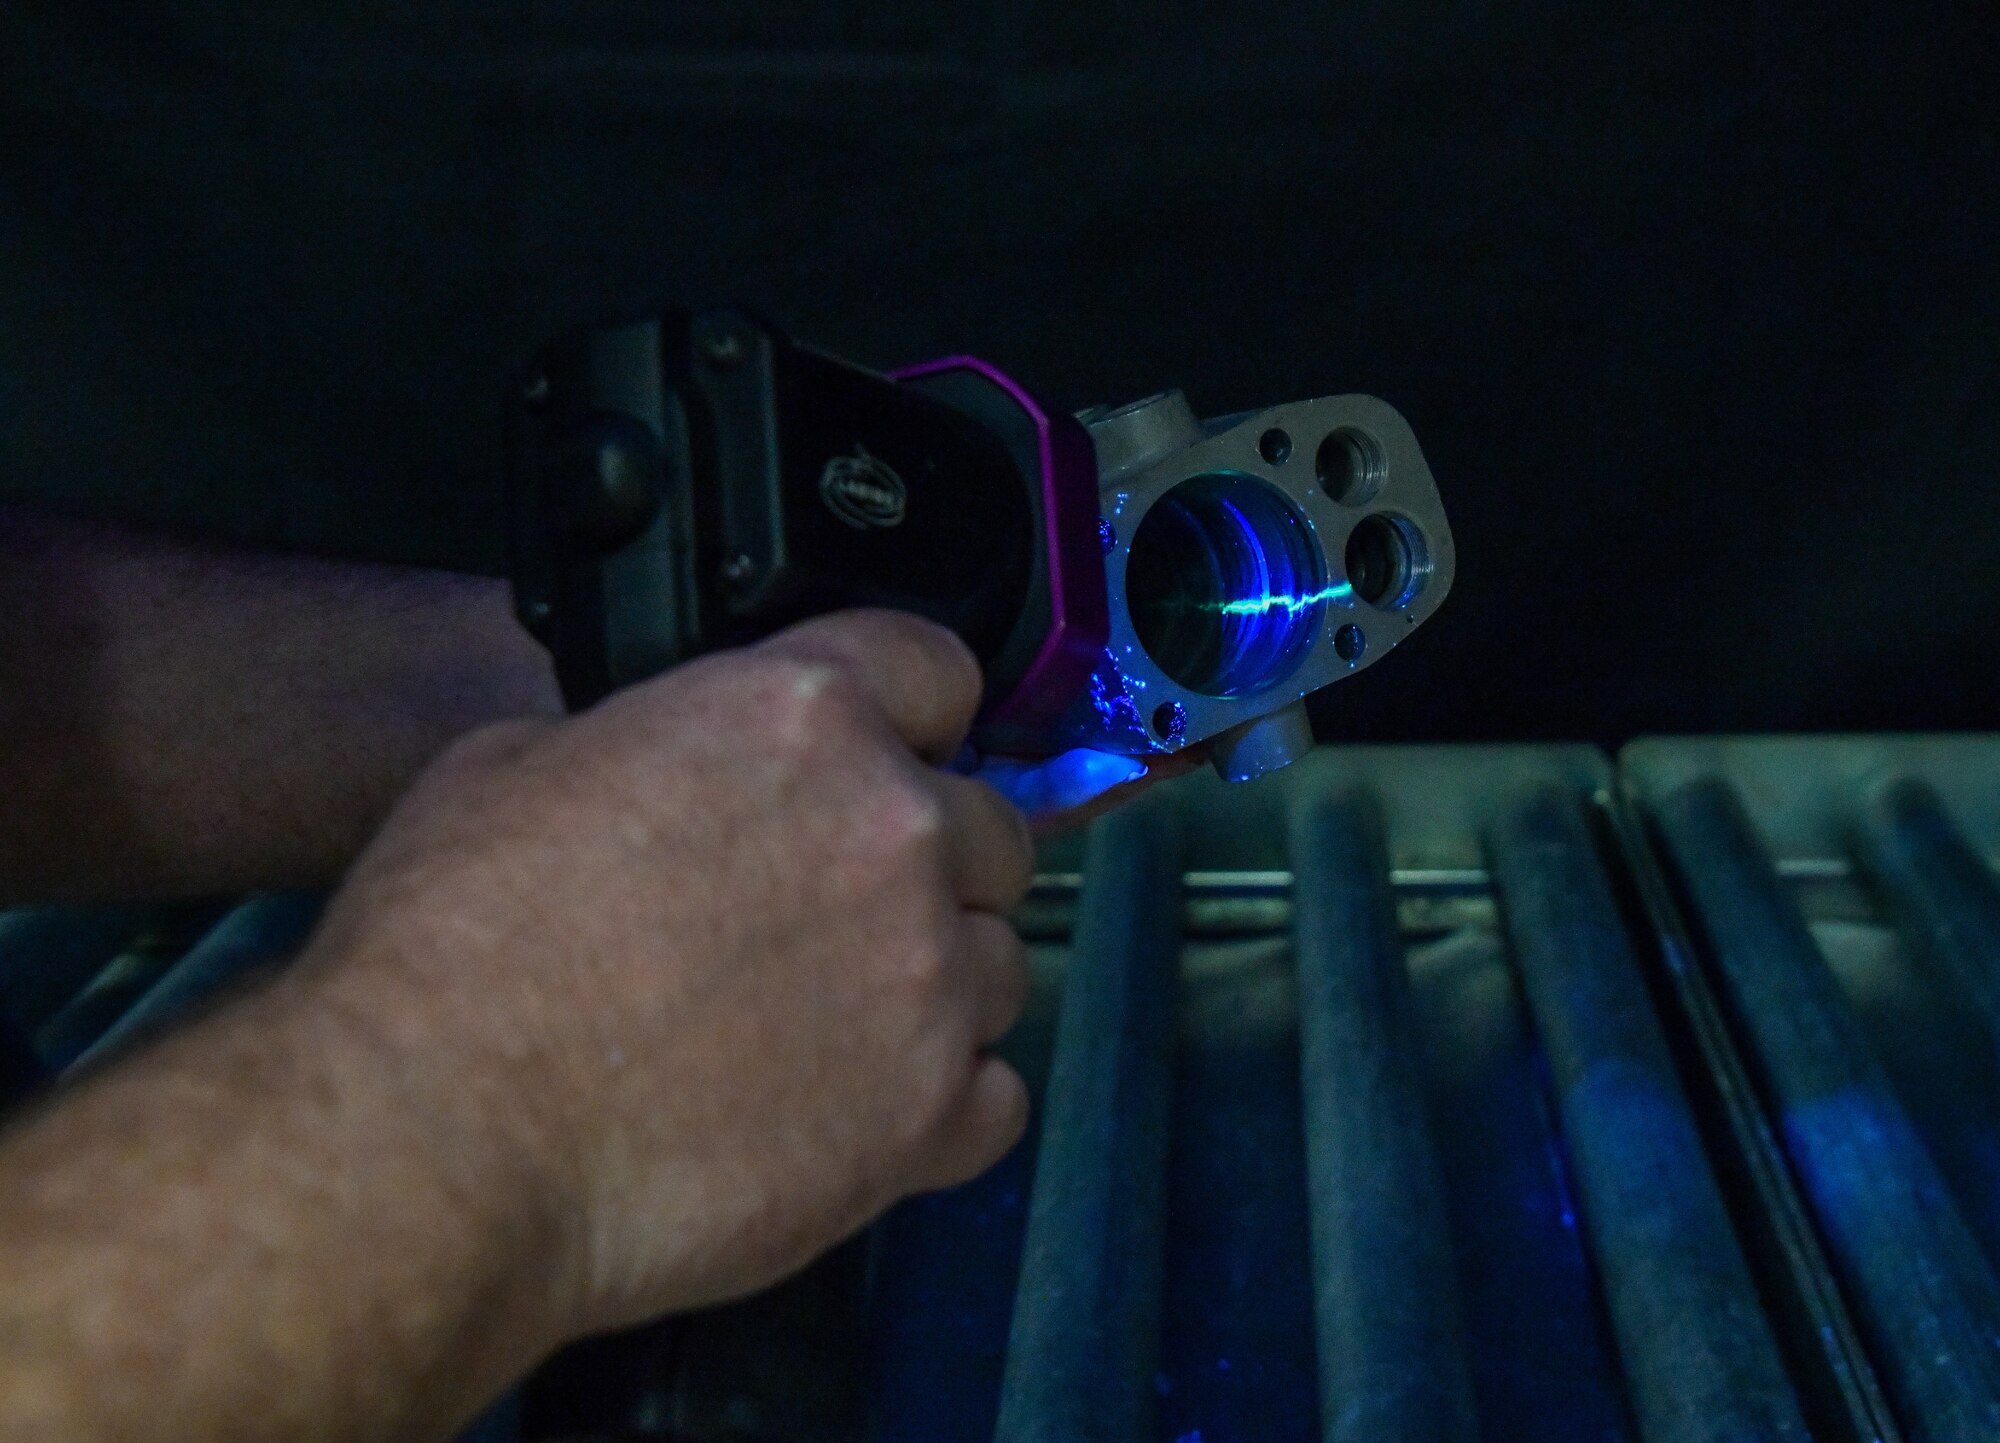 Gordon Tucker, 97th Maintenance Squadron nondestructive inspection tester, checks for cracks in a KC-135 spoiler actuator using a dye penetrant solution and ultraviolet light at Altus Air Force Base, Oklahoma, June 24, 2022. The solution seeps into cracks in the equipment, making them easily identifiable. (U.S. Air Force photo by Airman 1st Class Miyah Gray)